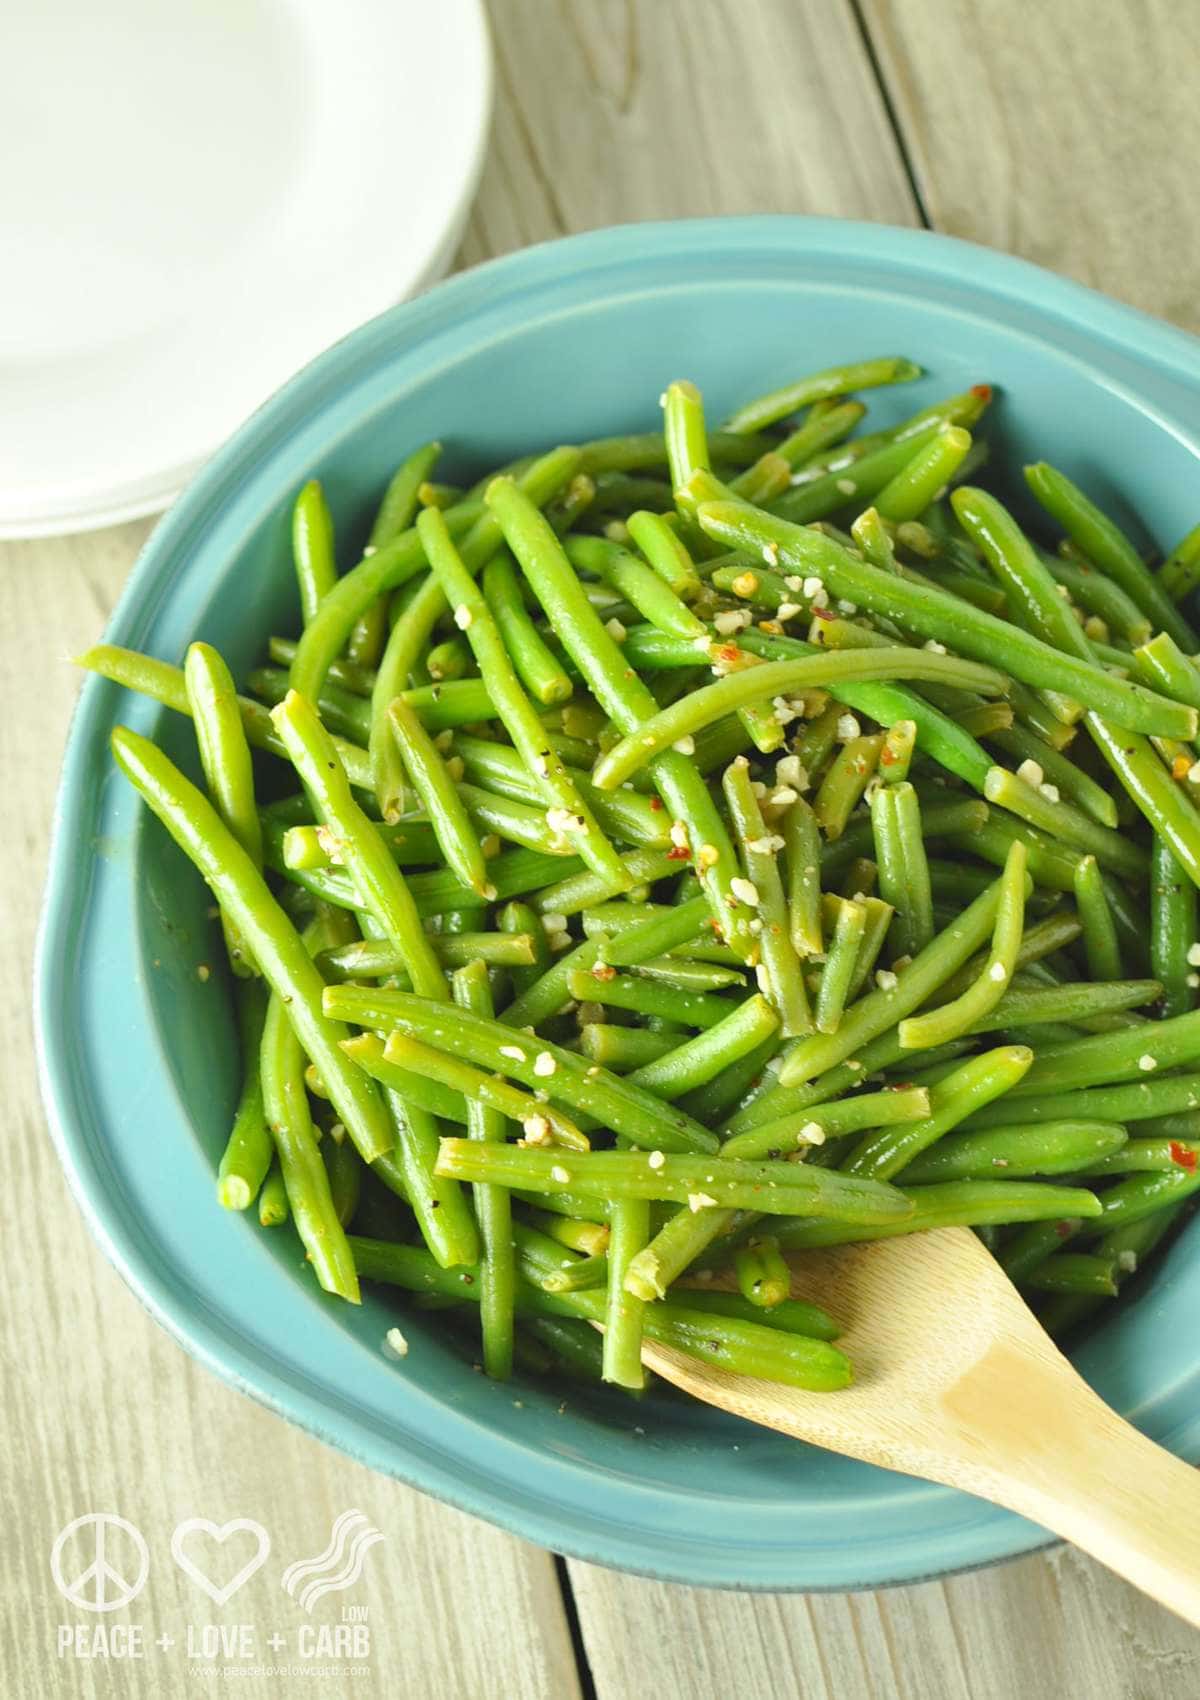 Lemon Pepper Green Beans - Low Carb, Paleo | Peace Love and Low Carb 